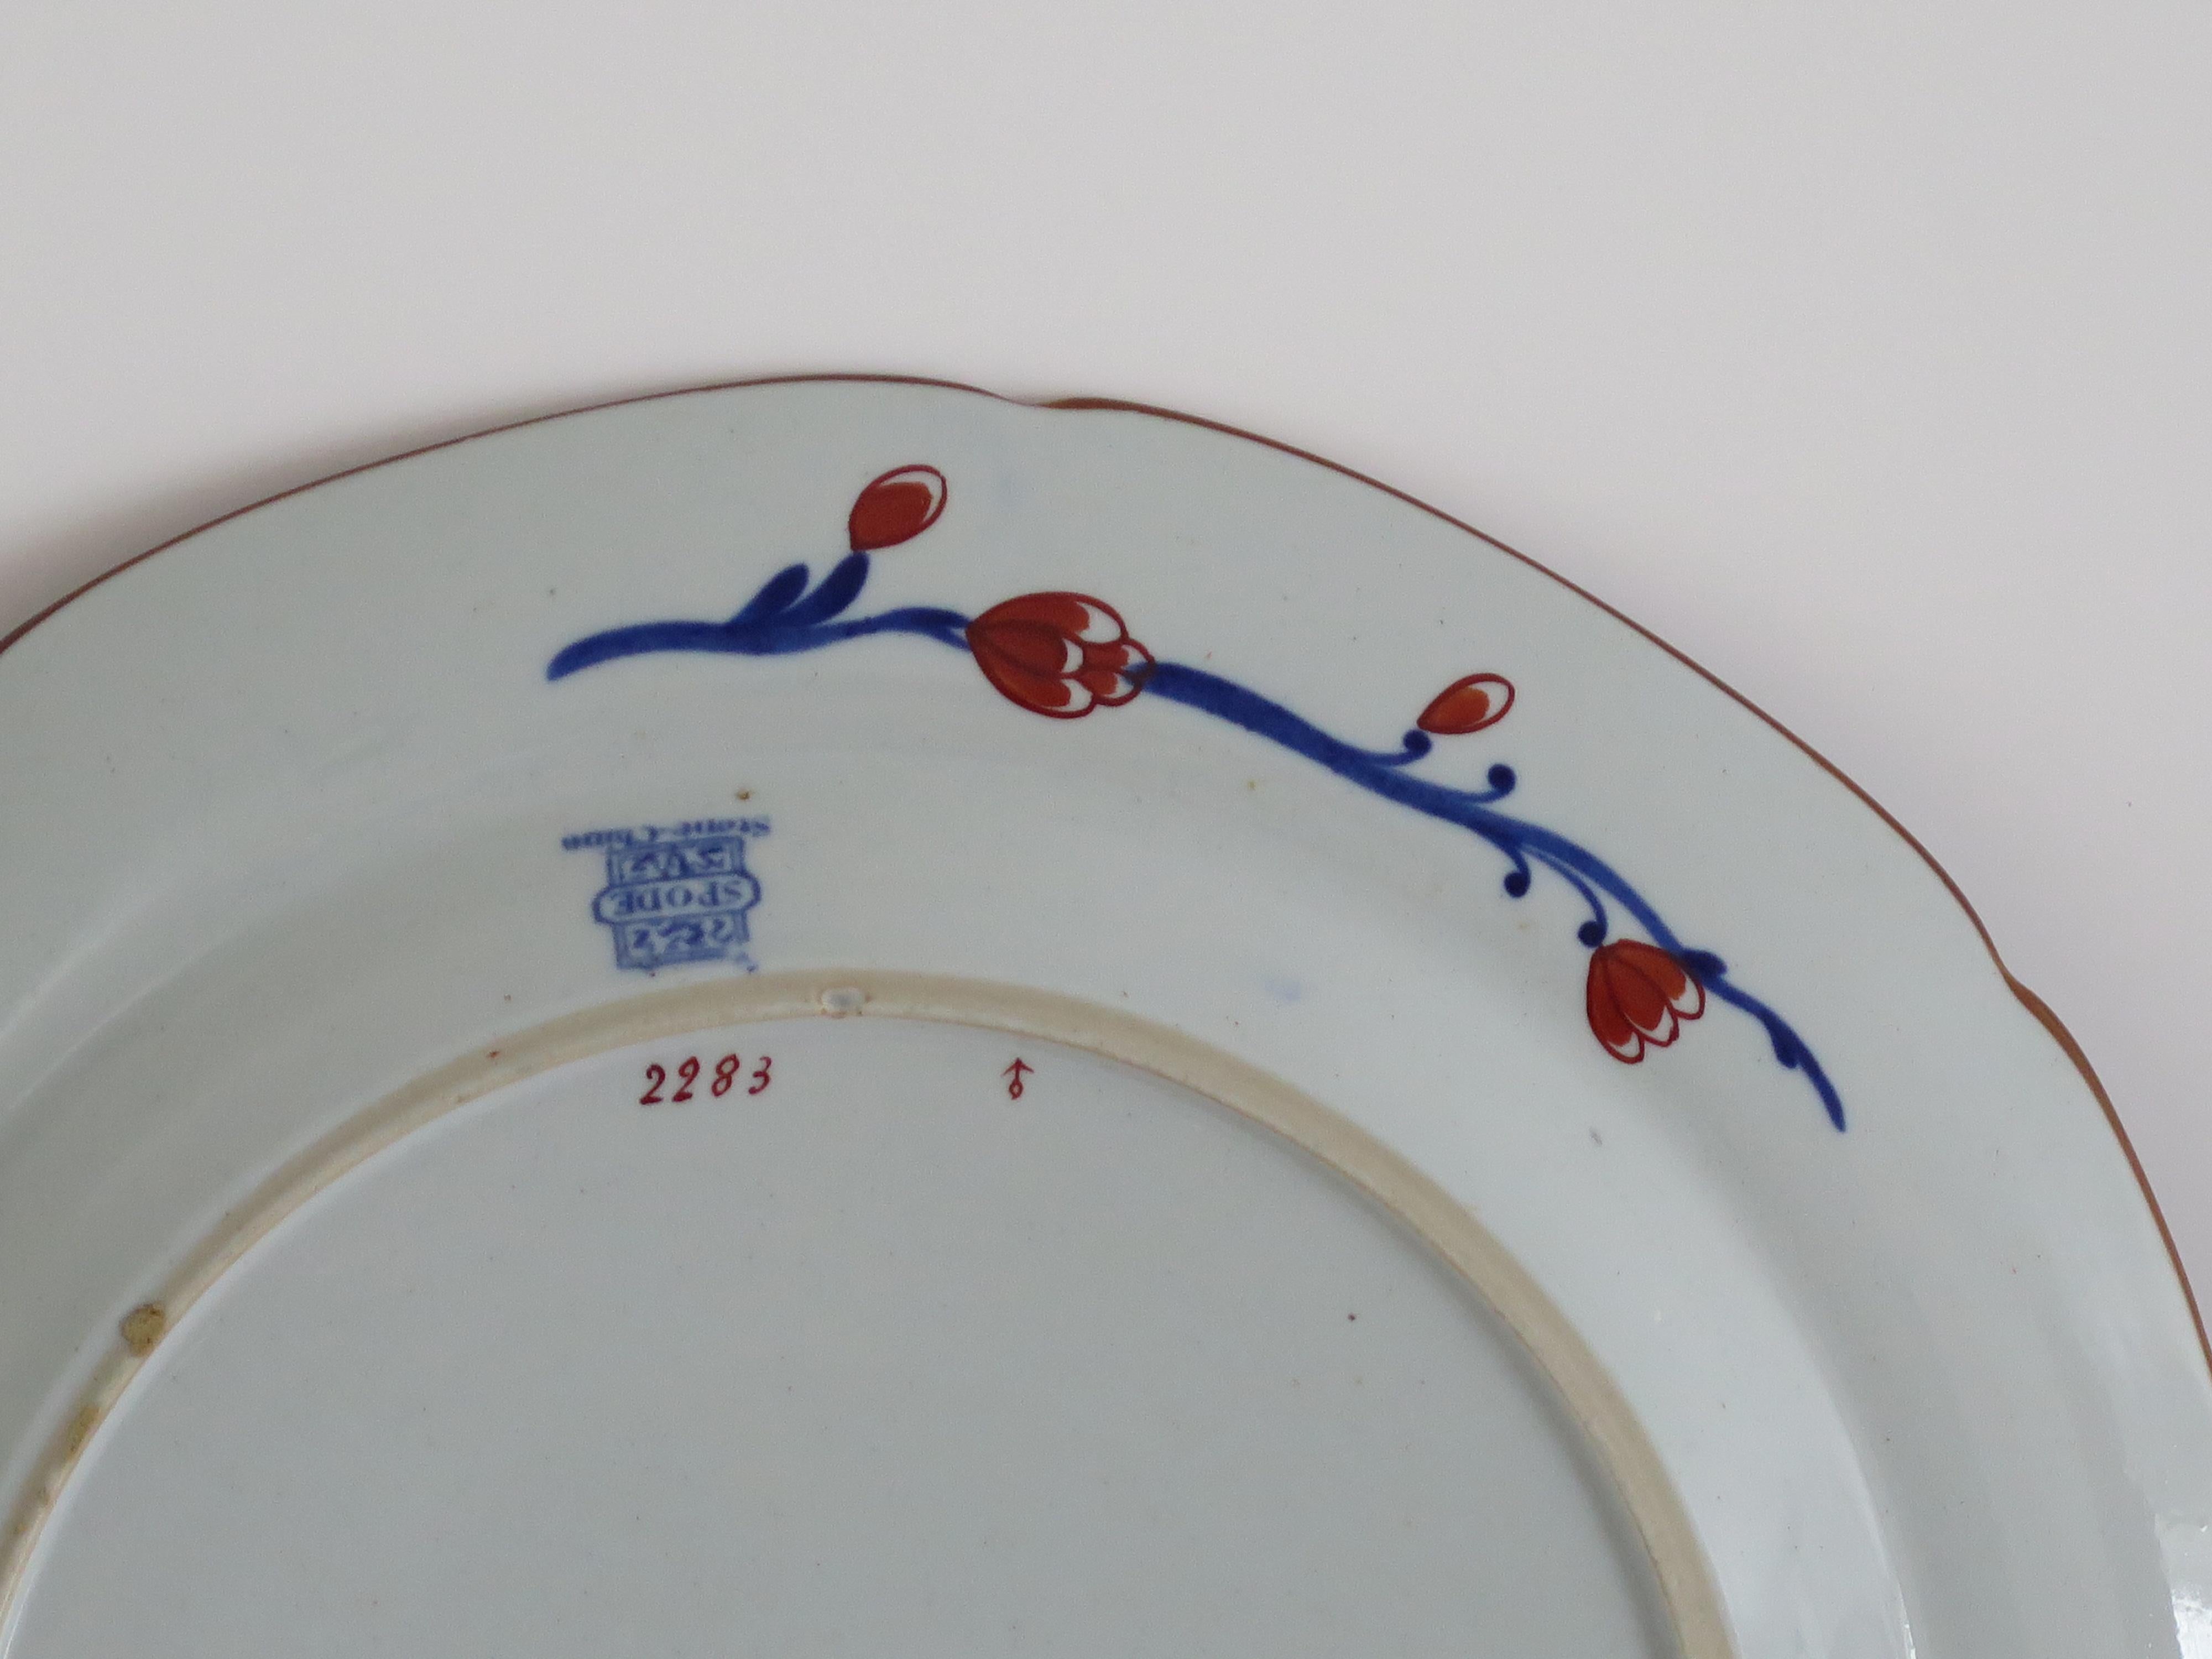 Georgian Spode Dinner Plate a Ironstone Chinoiserie Pattern No.2283, circa 1820 For Sale 6